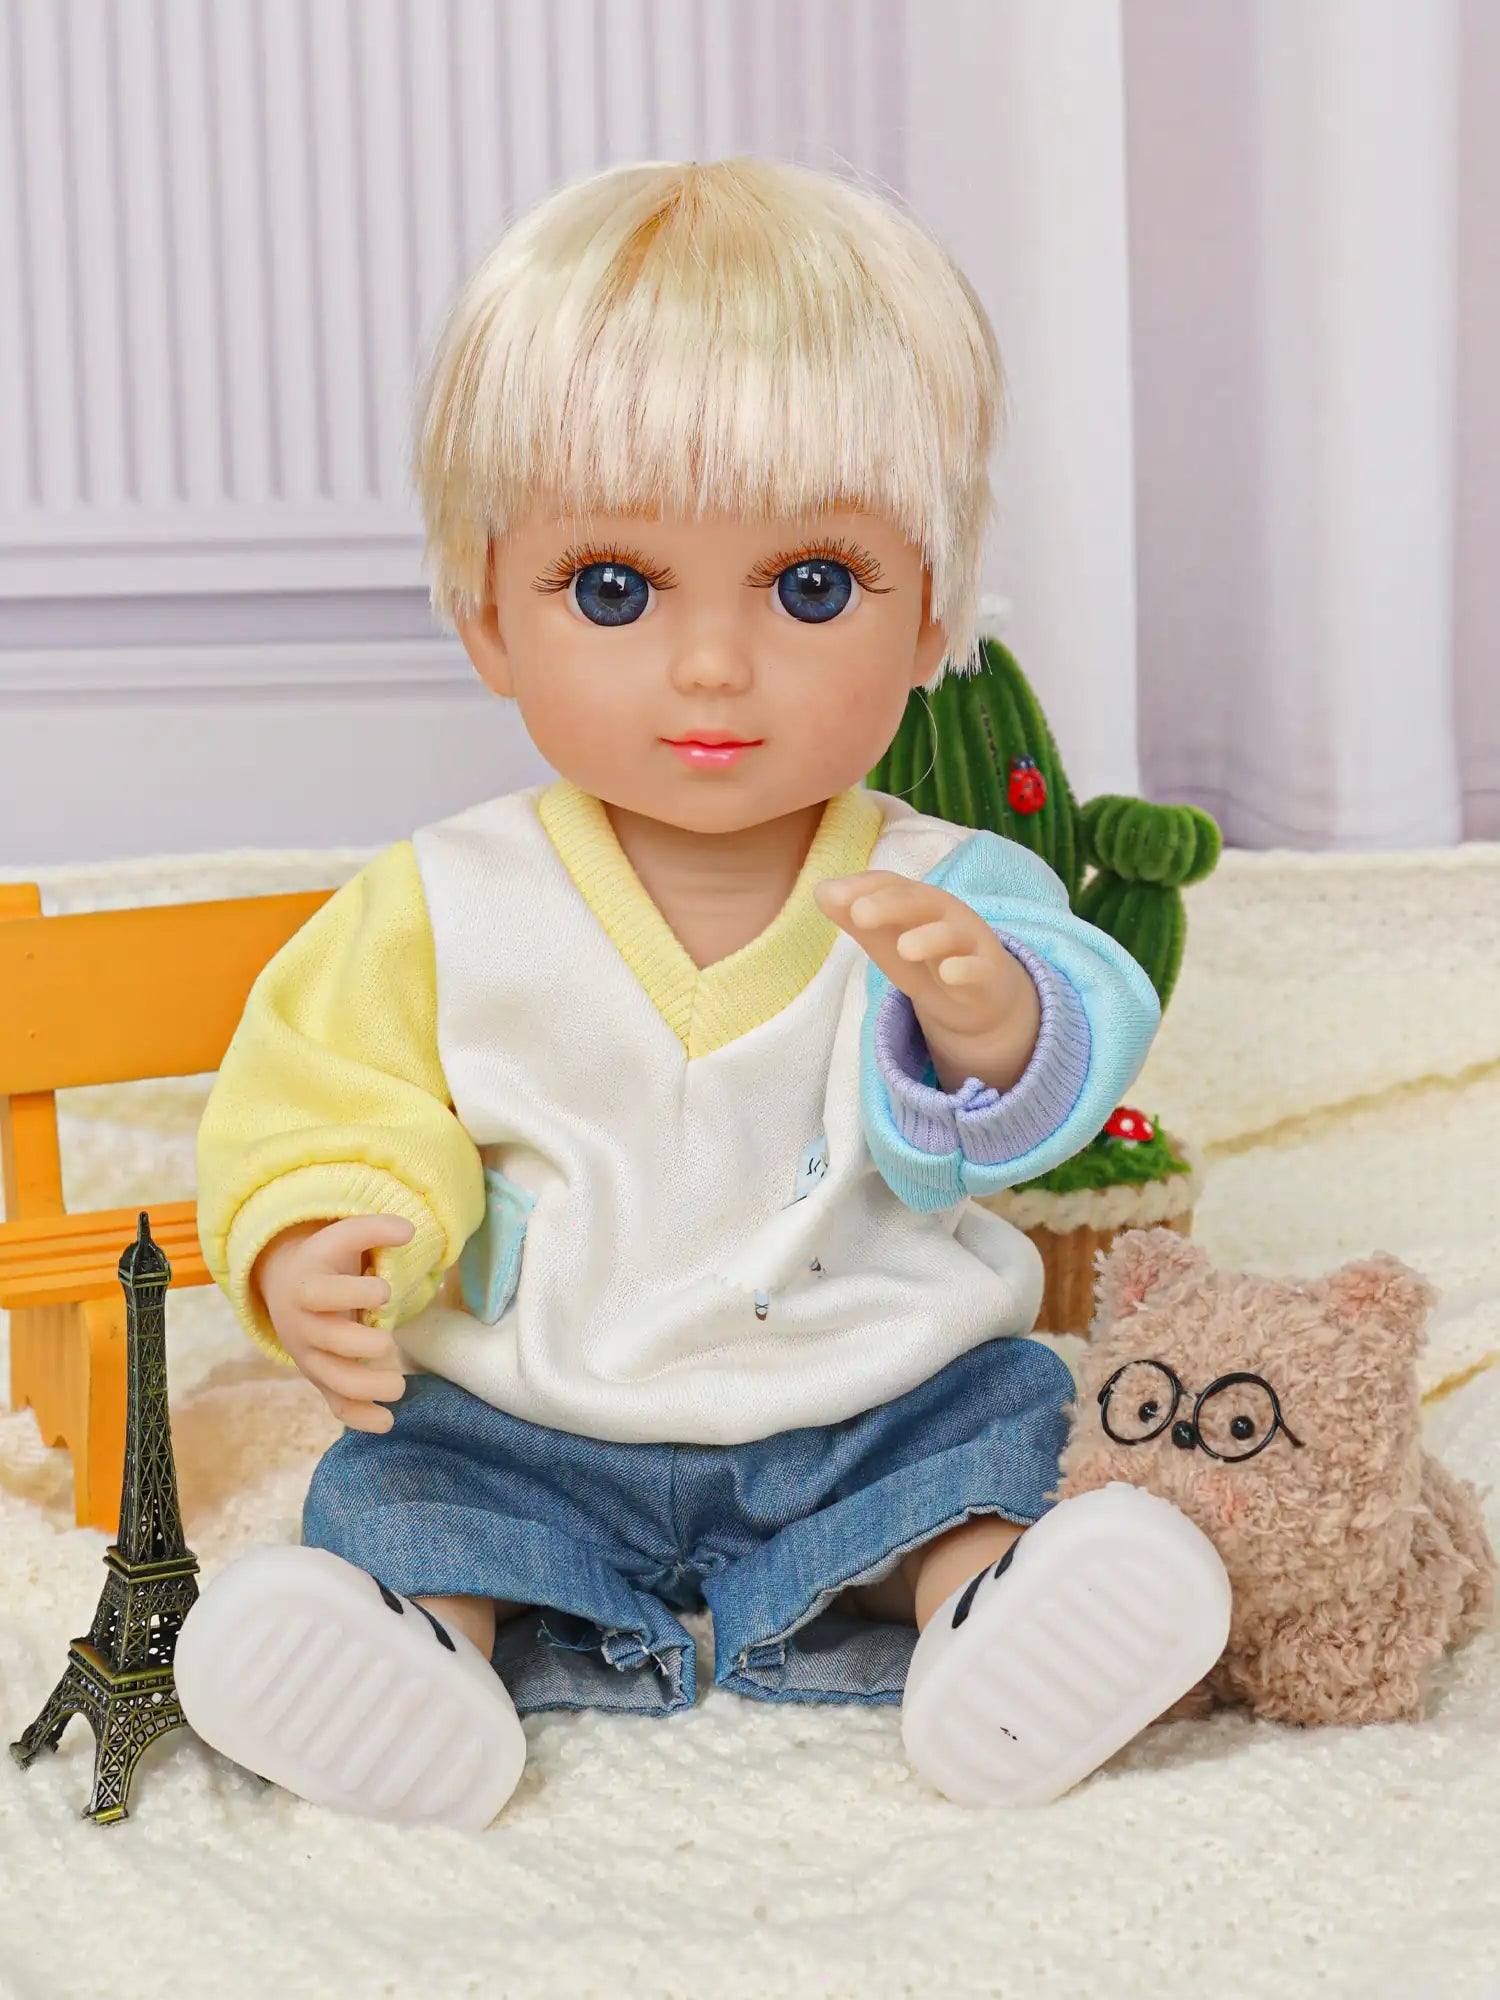 Fashion doll in a casual blue and yellow sweater, denim shorts, with a mini metal tower.